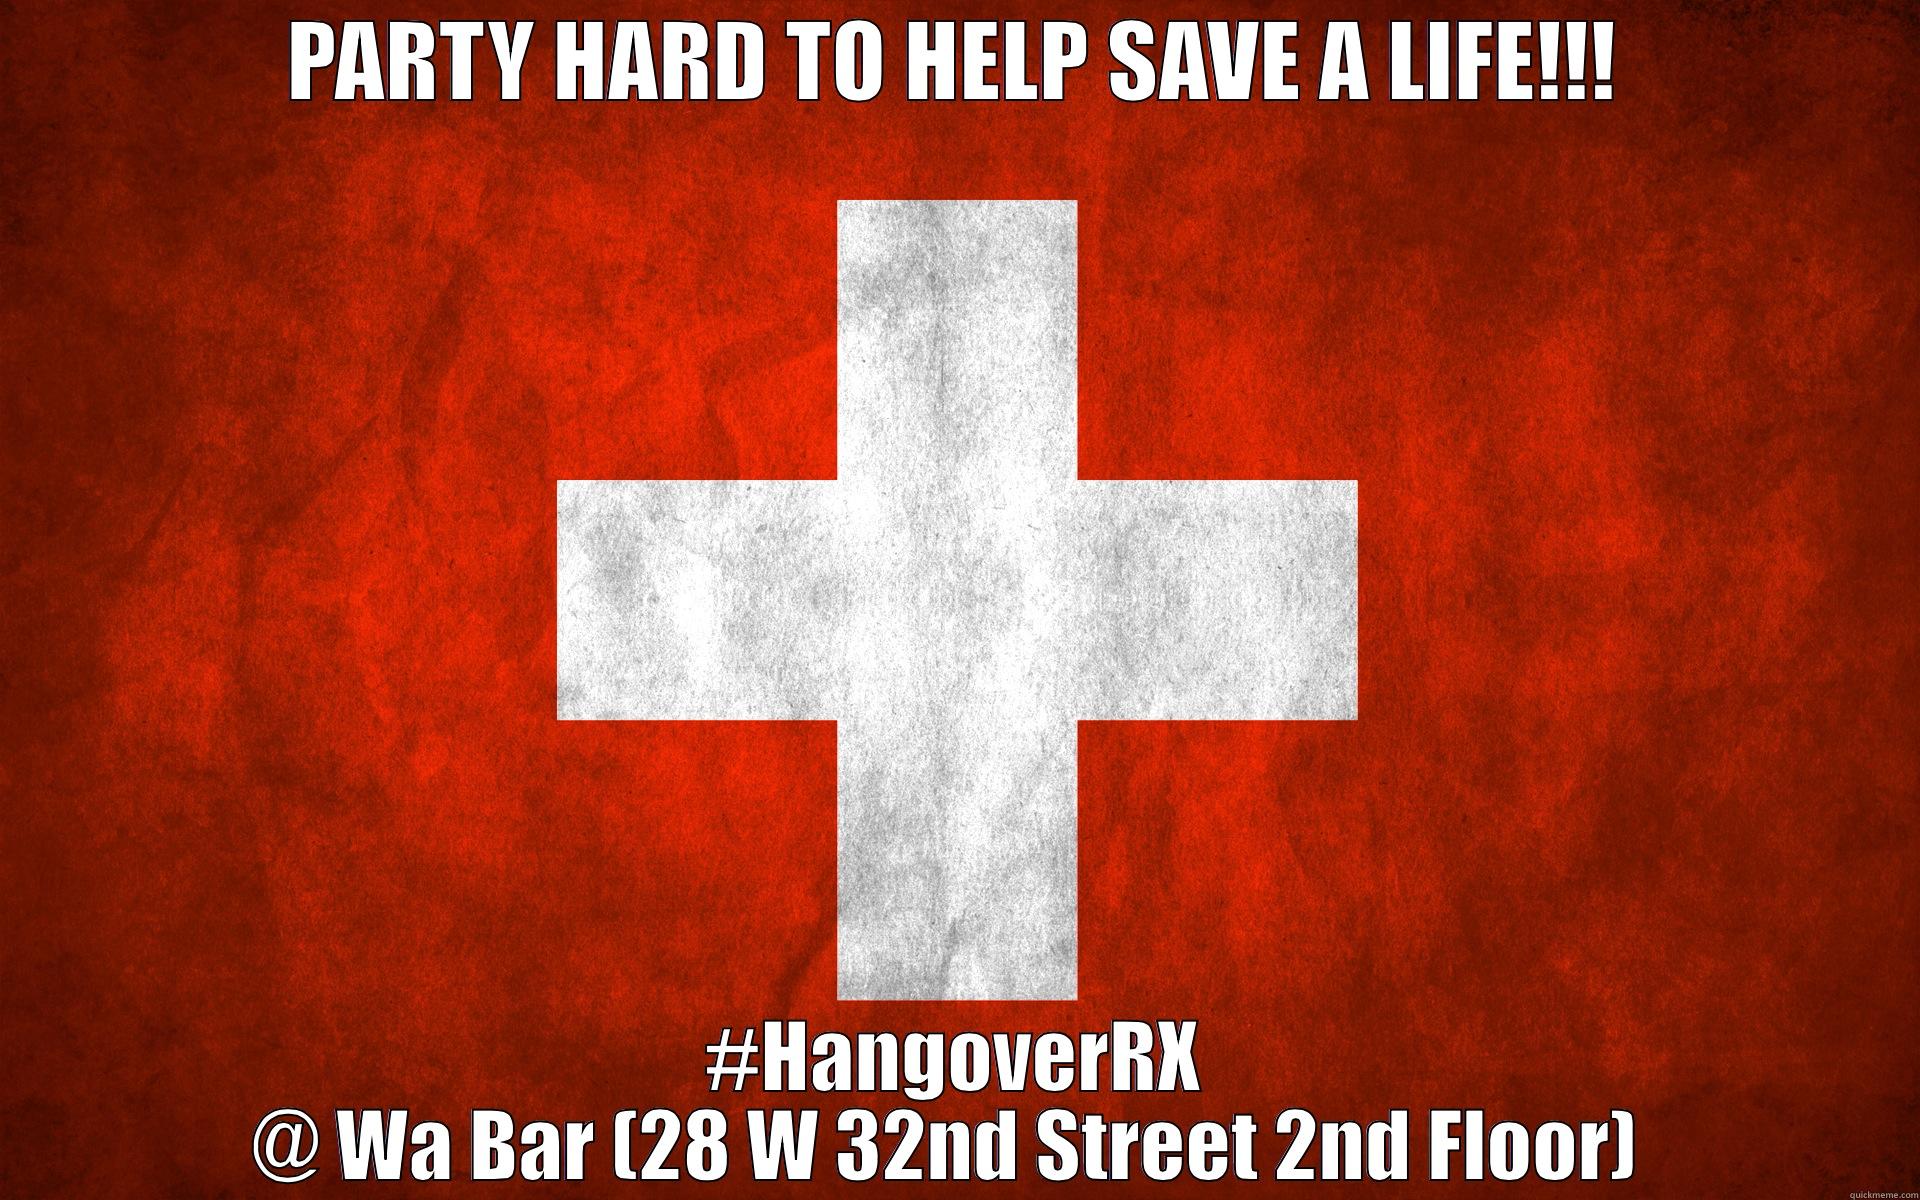 PARTY HARD TO HELP SAVE A LIFE!!! #HANGOVERRX @ WA BAR (28 W 32ND STREET 2ND FLOOR)  Misc